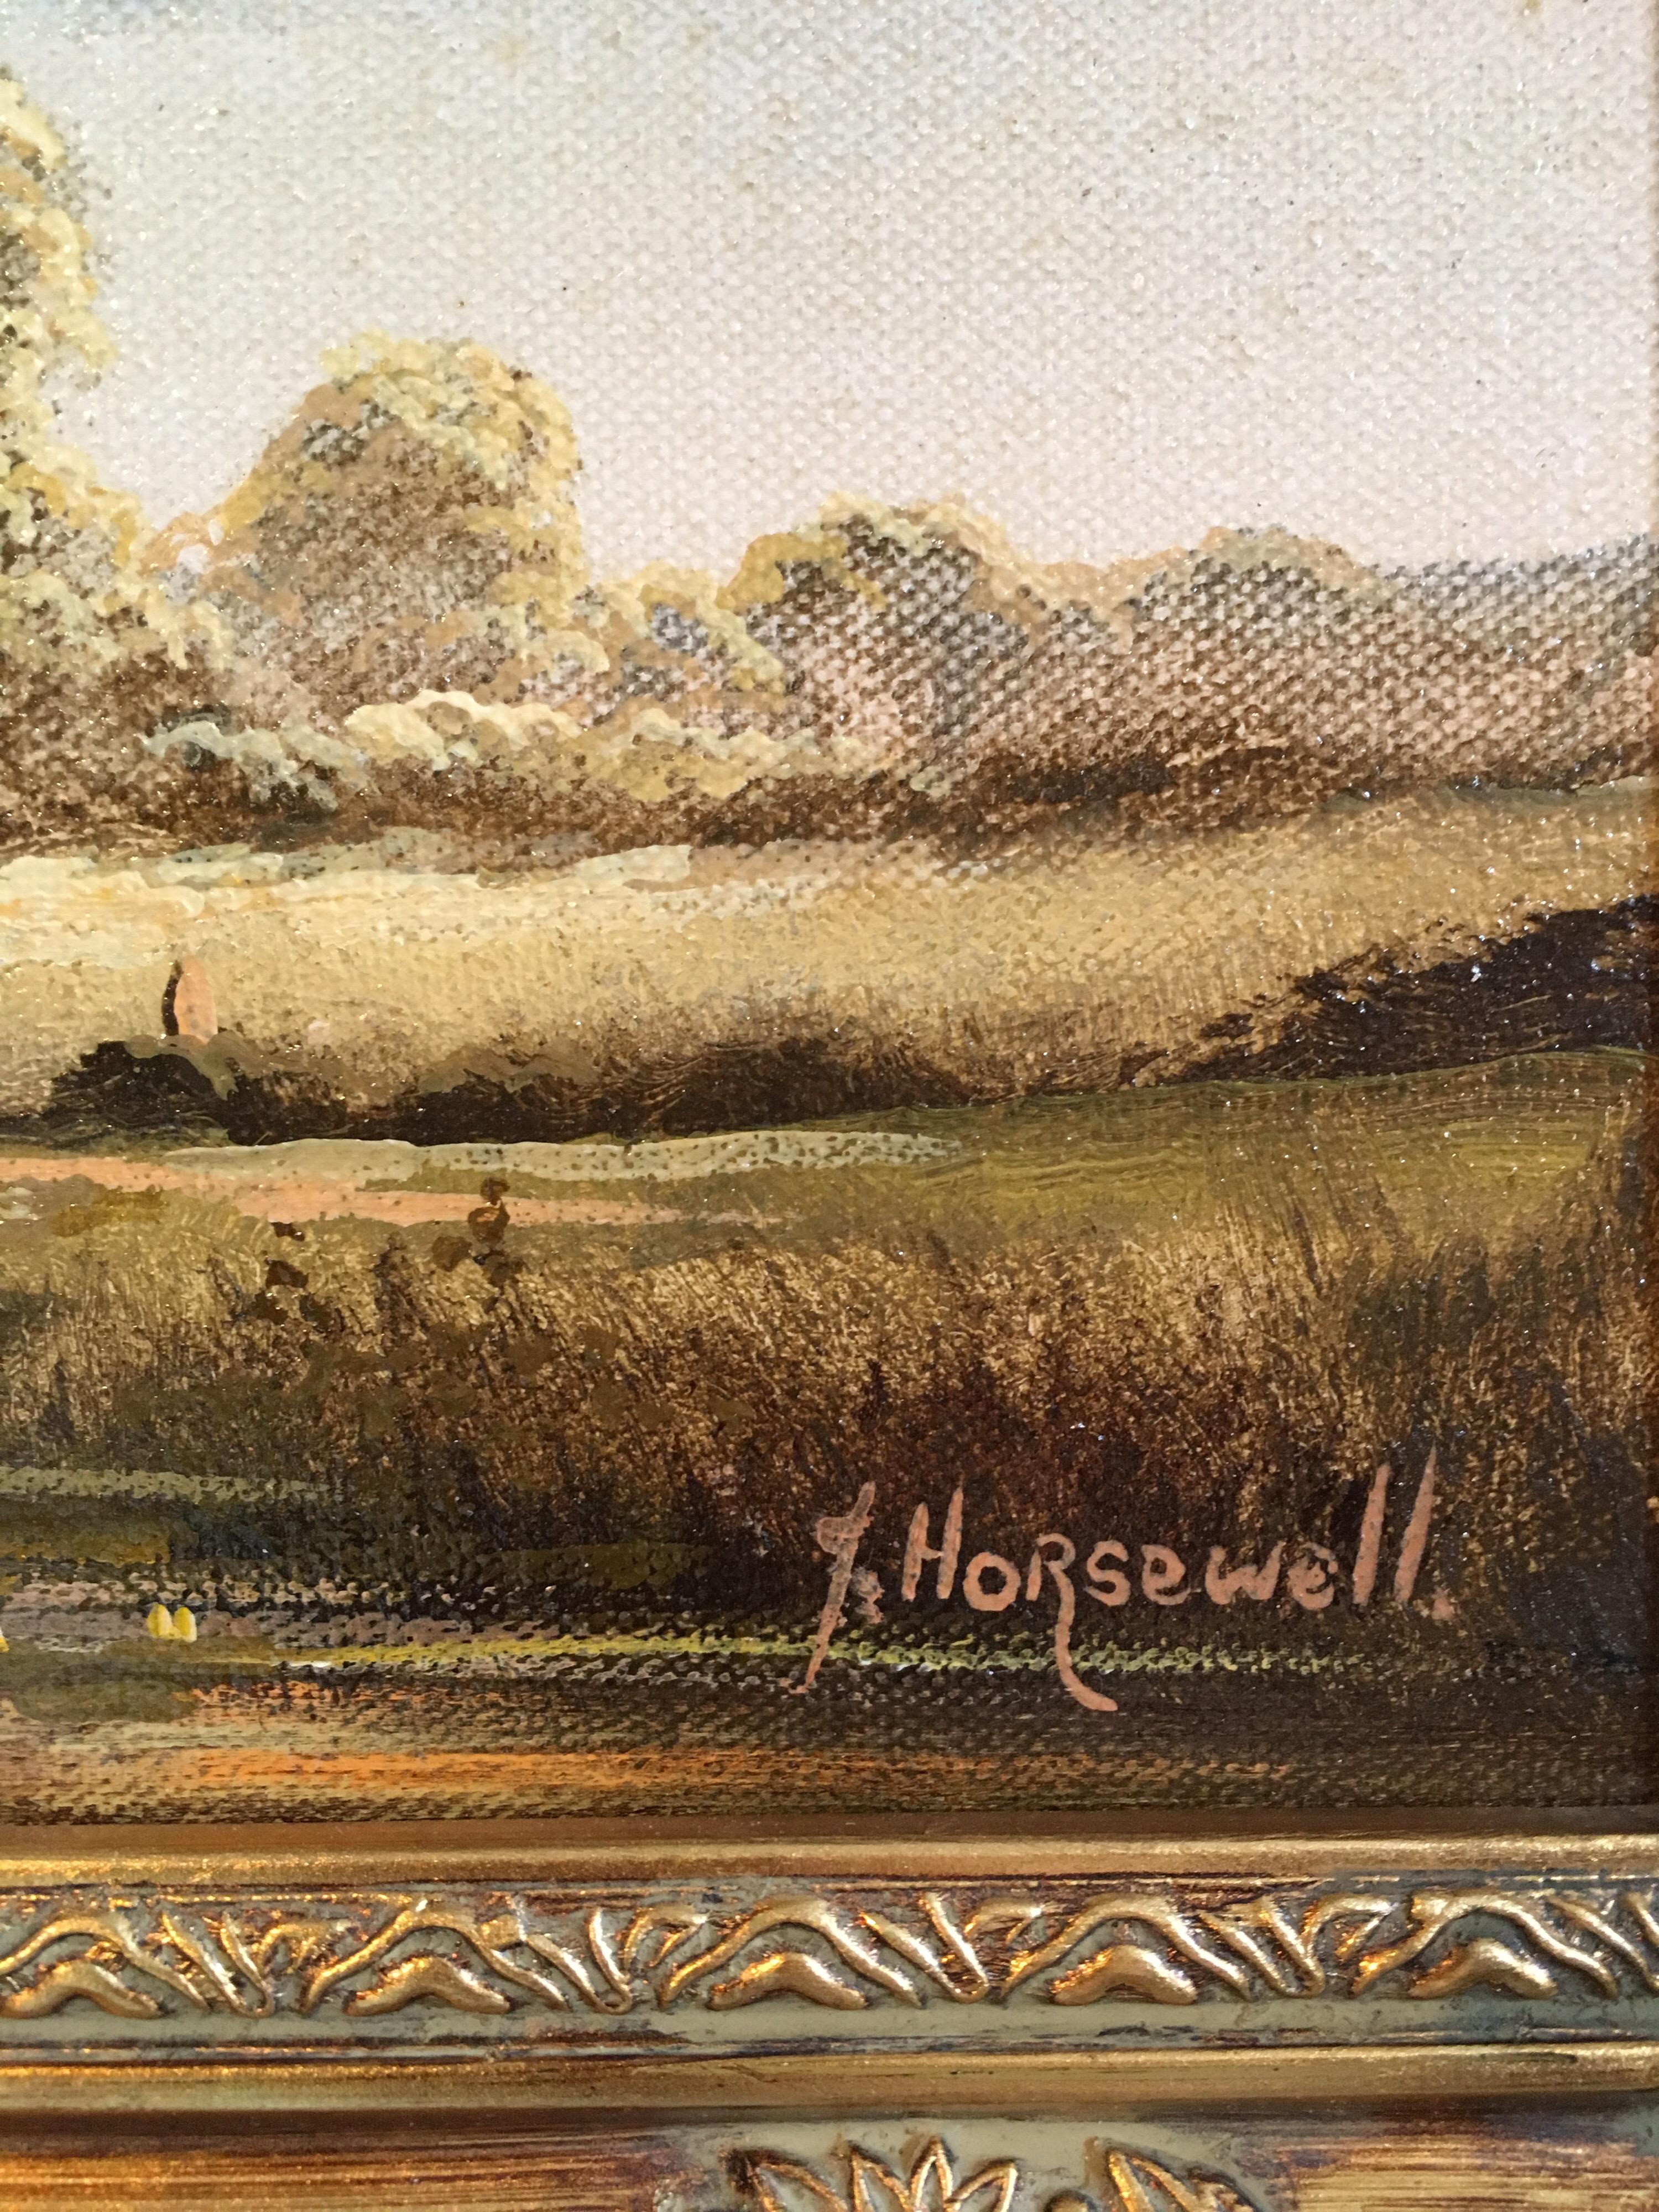 Two Fine Oil Paintings, Impressionist Landscape, Signed by the Artist
By British artist Brian Horsewell, b.1939
Signed by the artist on both paintings on the lower right hand corner
Oil painting on canvas, framed
Each framed sizes: 11.5 x 13.5